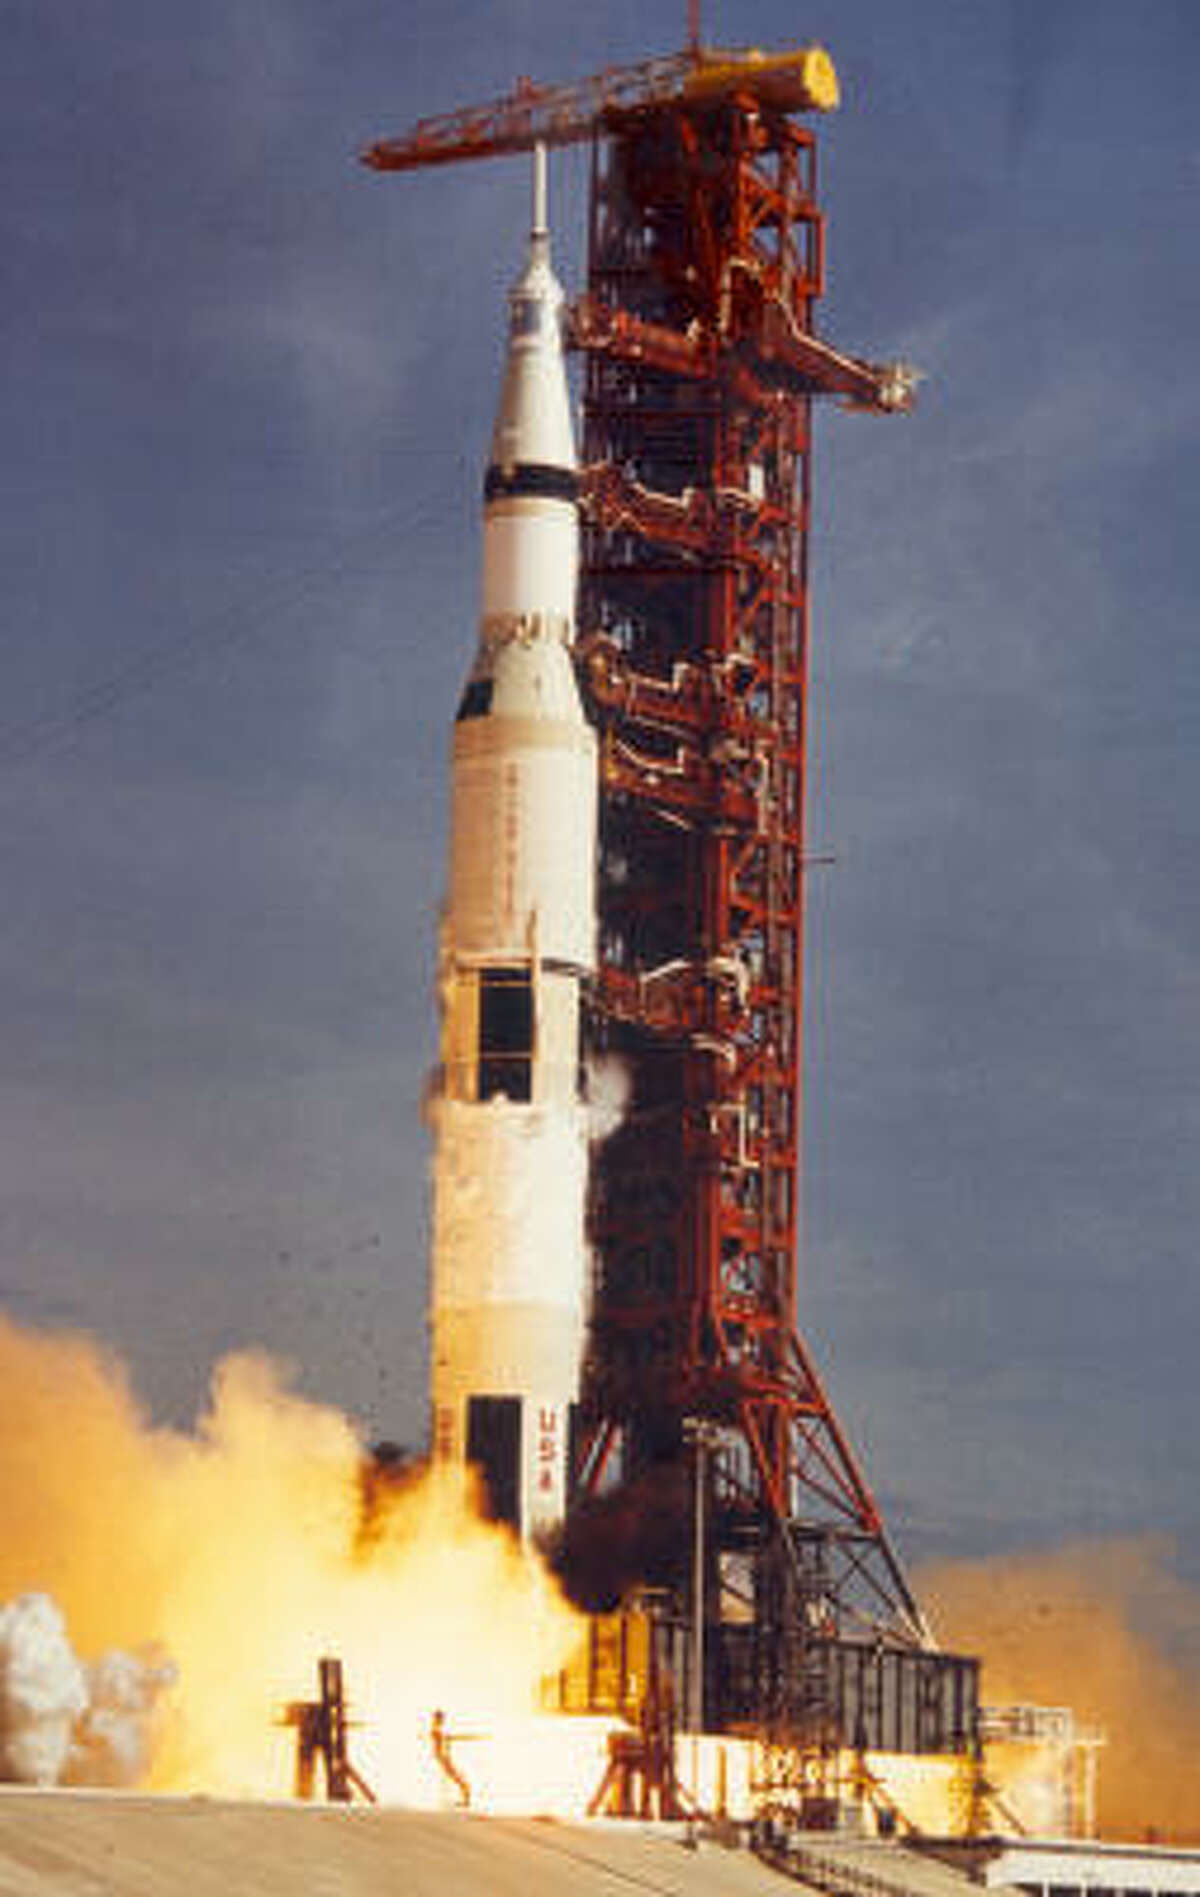 The Saturn V makes history. The launch is marked in the annals of time by a period that included two other key events: Sen. Edward Kennedy's crash at Chappaquiddick (July 18) and Woodstock (Aug. 15). Apollo 11 video here.